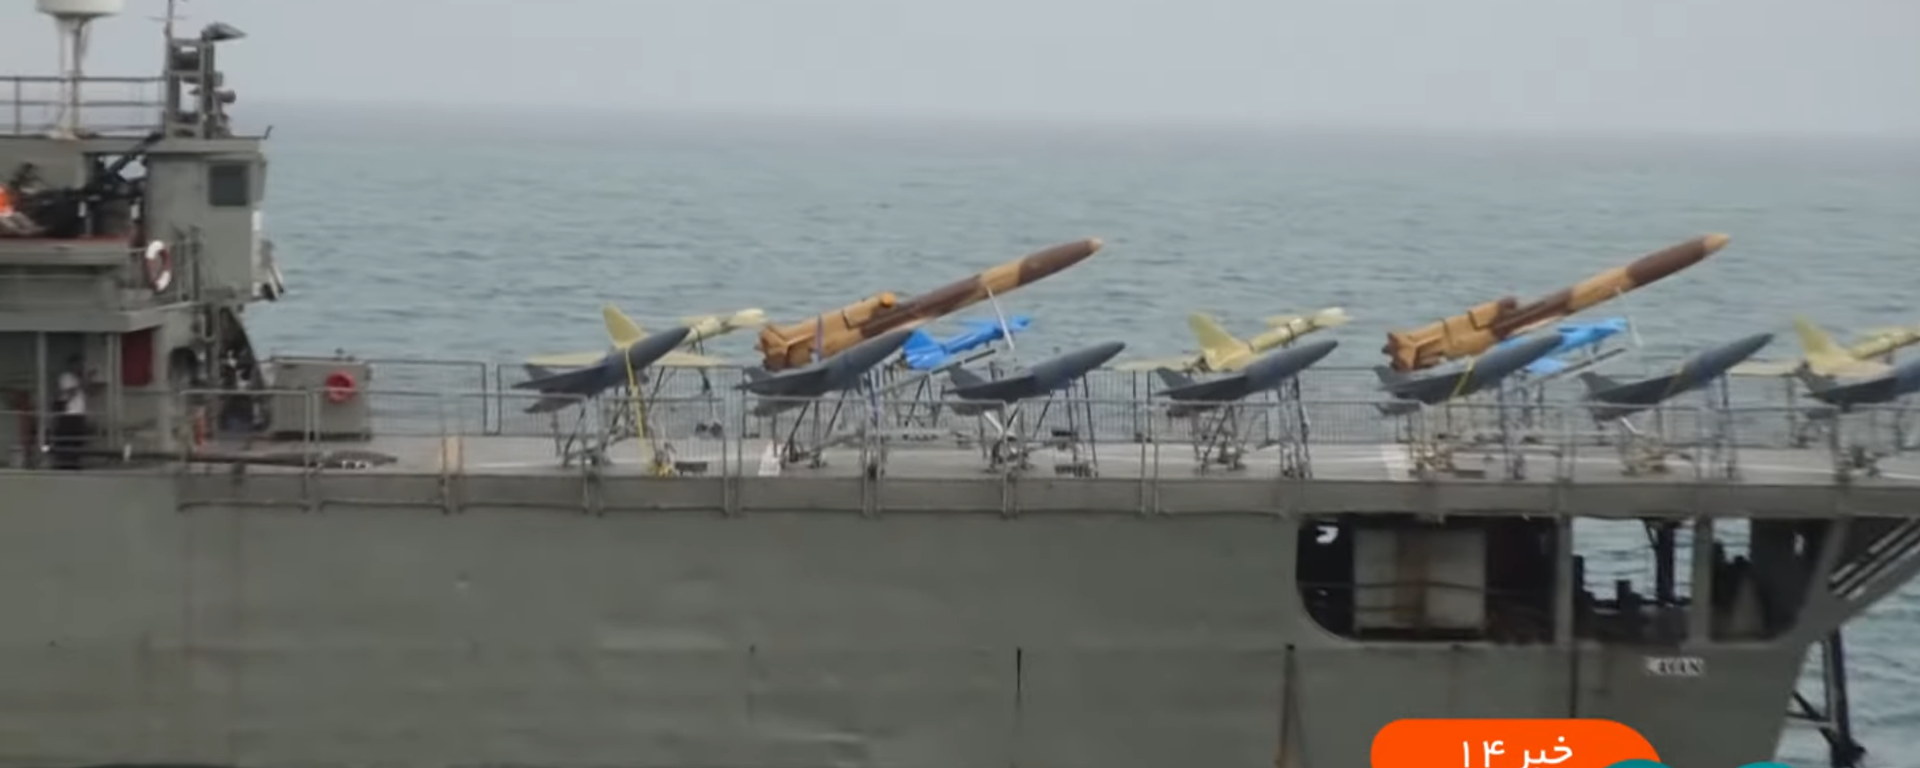 Iranian drones based aboard a warship during drills in the Indian Ocean. Friday, July 15, 2022. Screengrab from Iranian television report. - Sputnik International, 1920, 15.07.2022